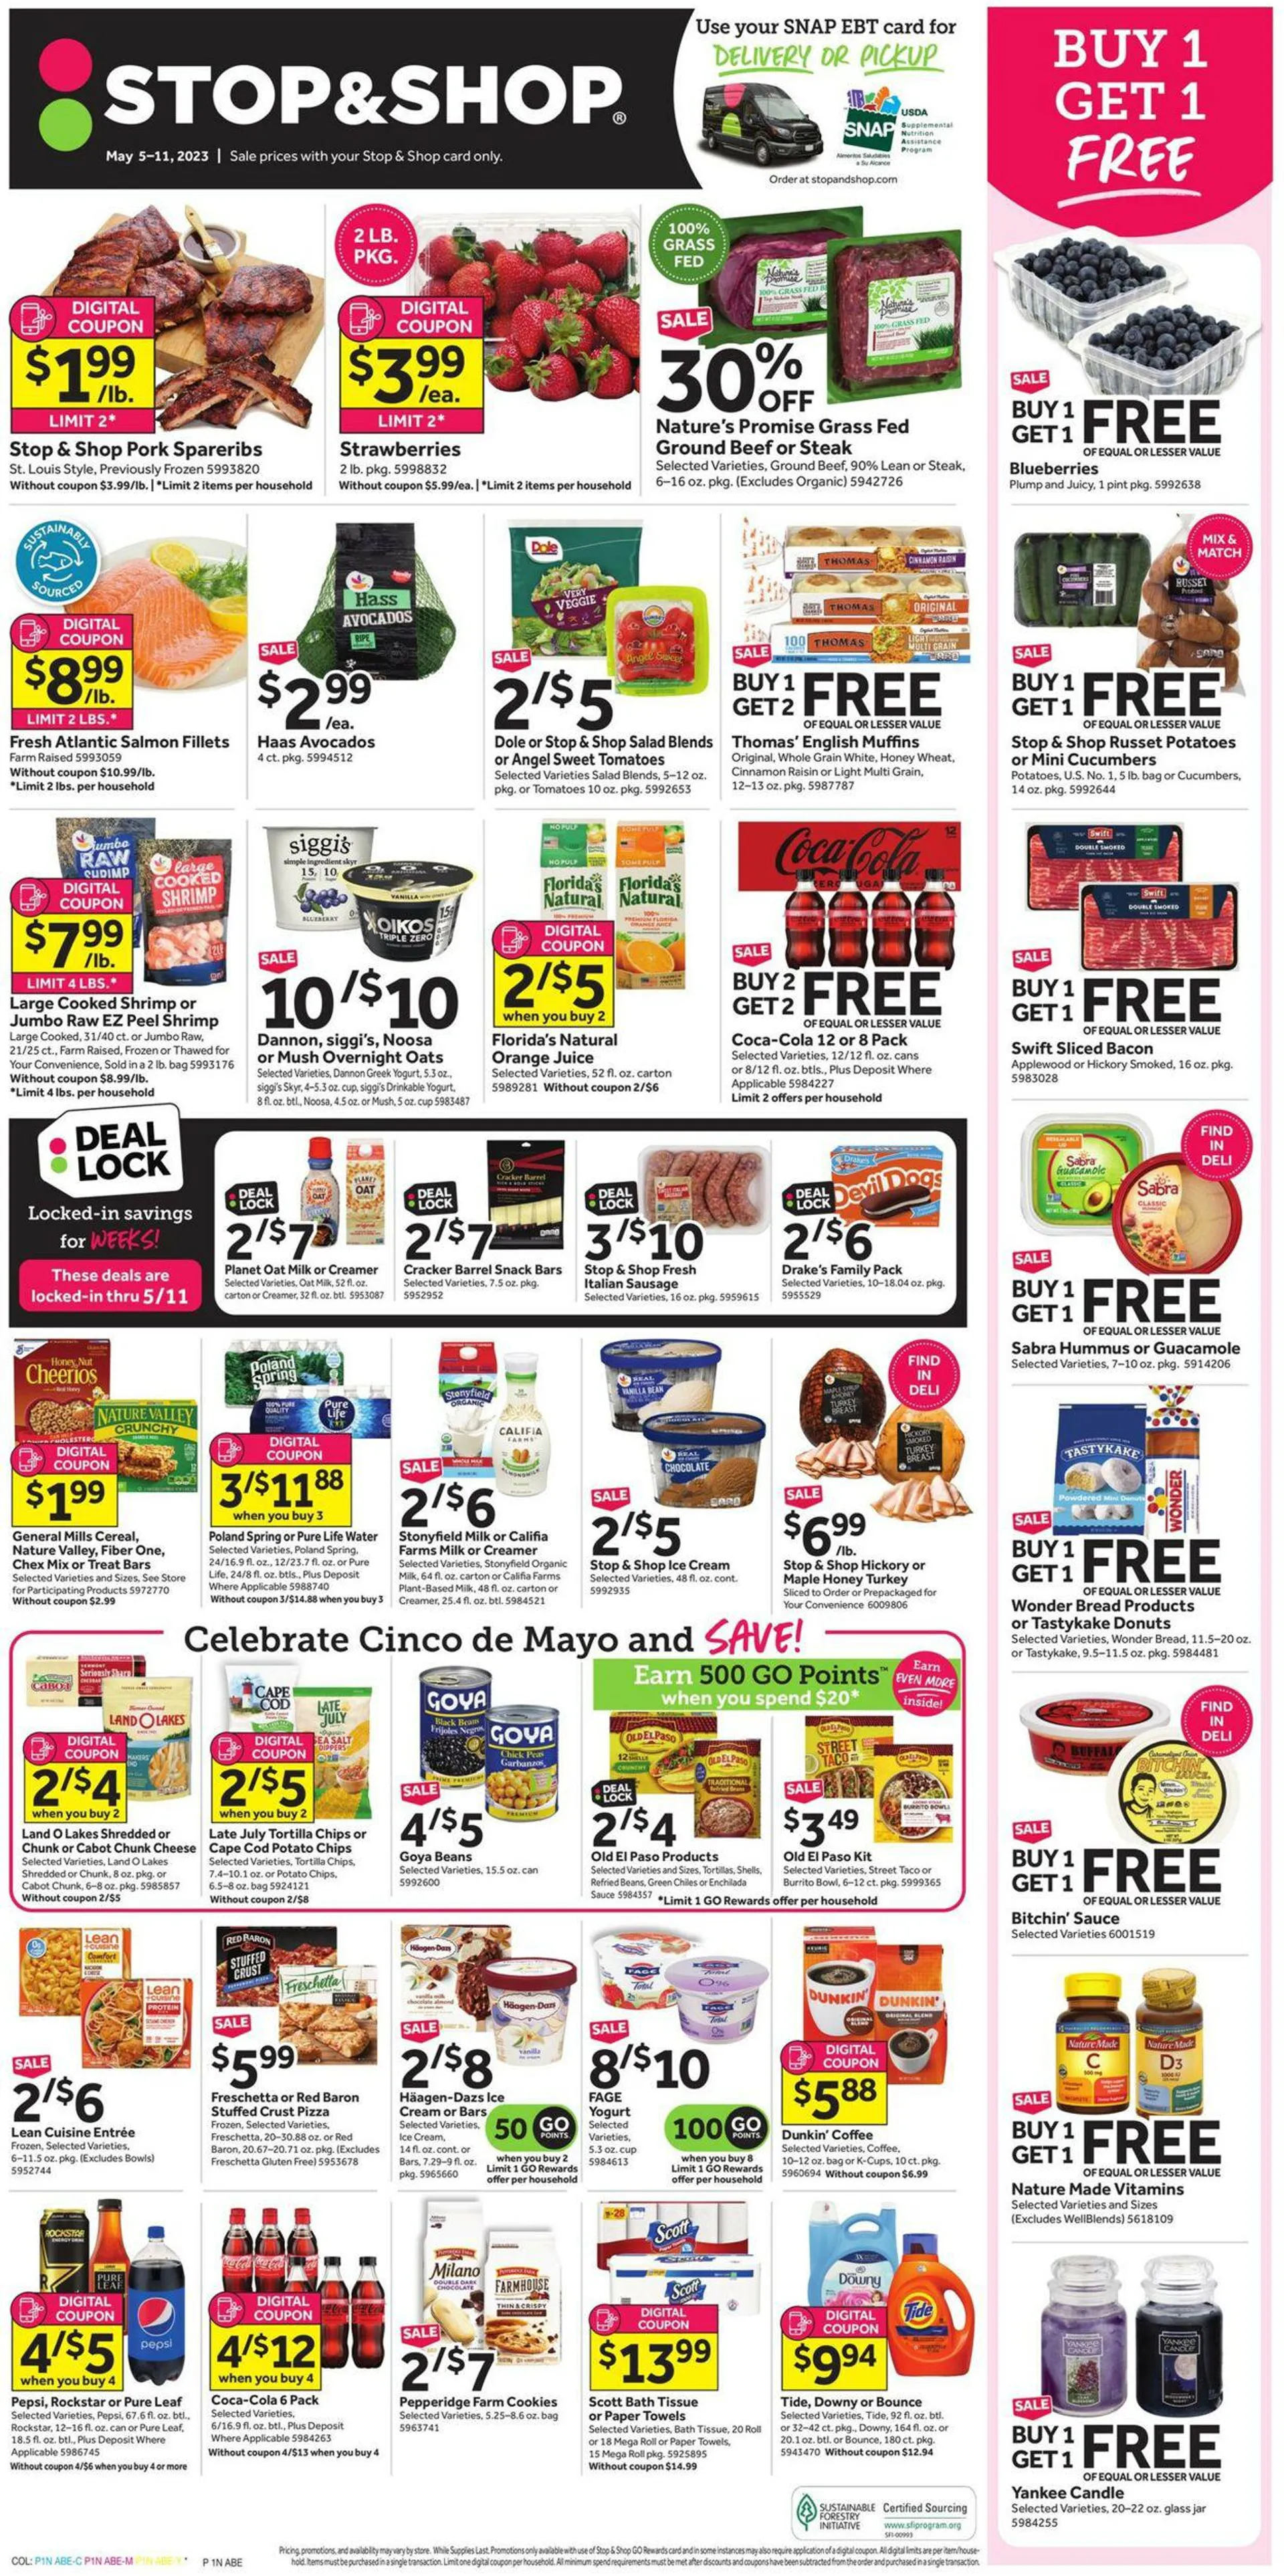 Stop and Shop Current weekly ad - 1